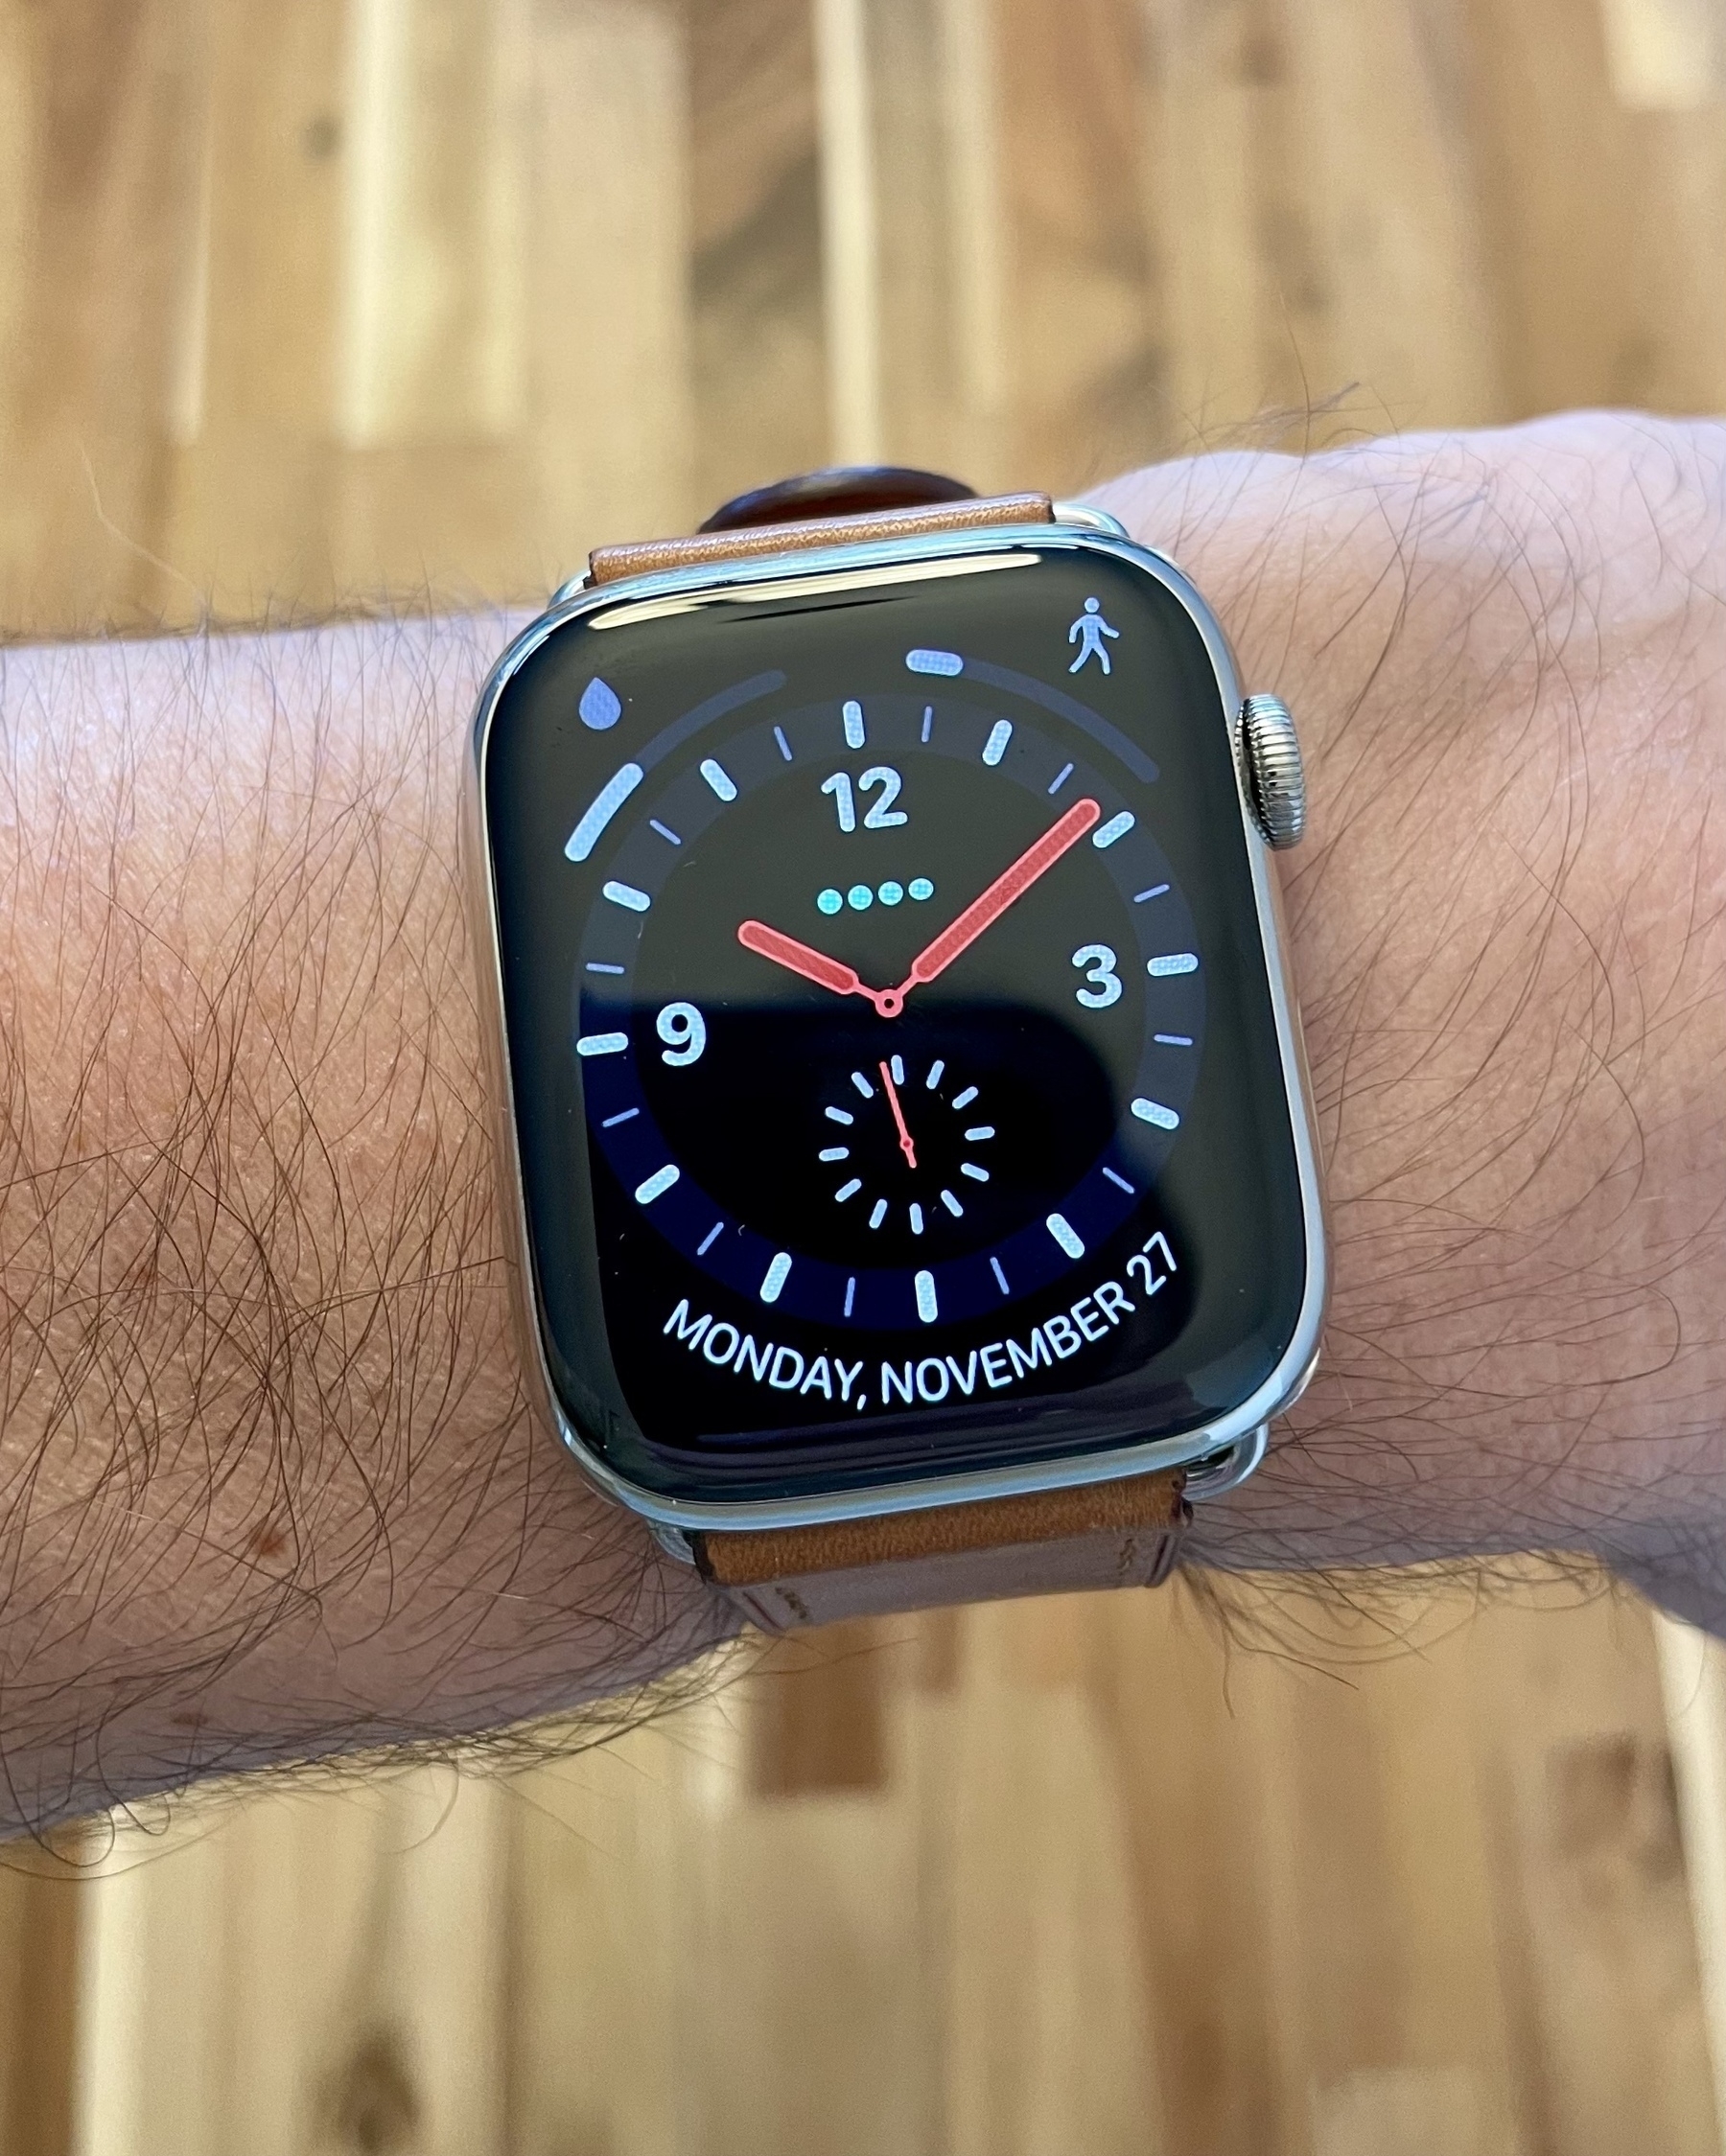 An Apple Watch showing the Explorer face, with the upper-left complication showing water consumption and upper-right showing steps taken, both as progress bars. The bottom complication shows the day and date.